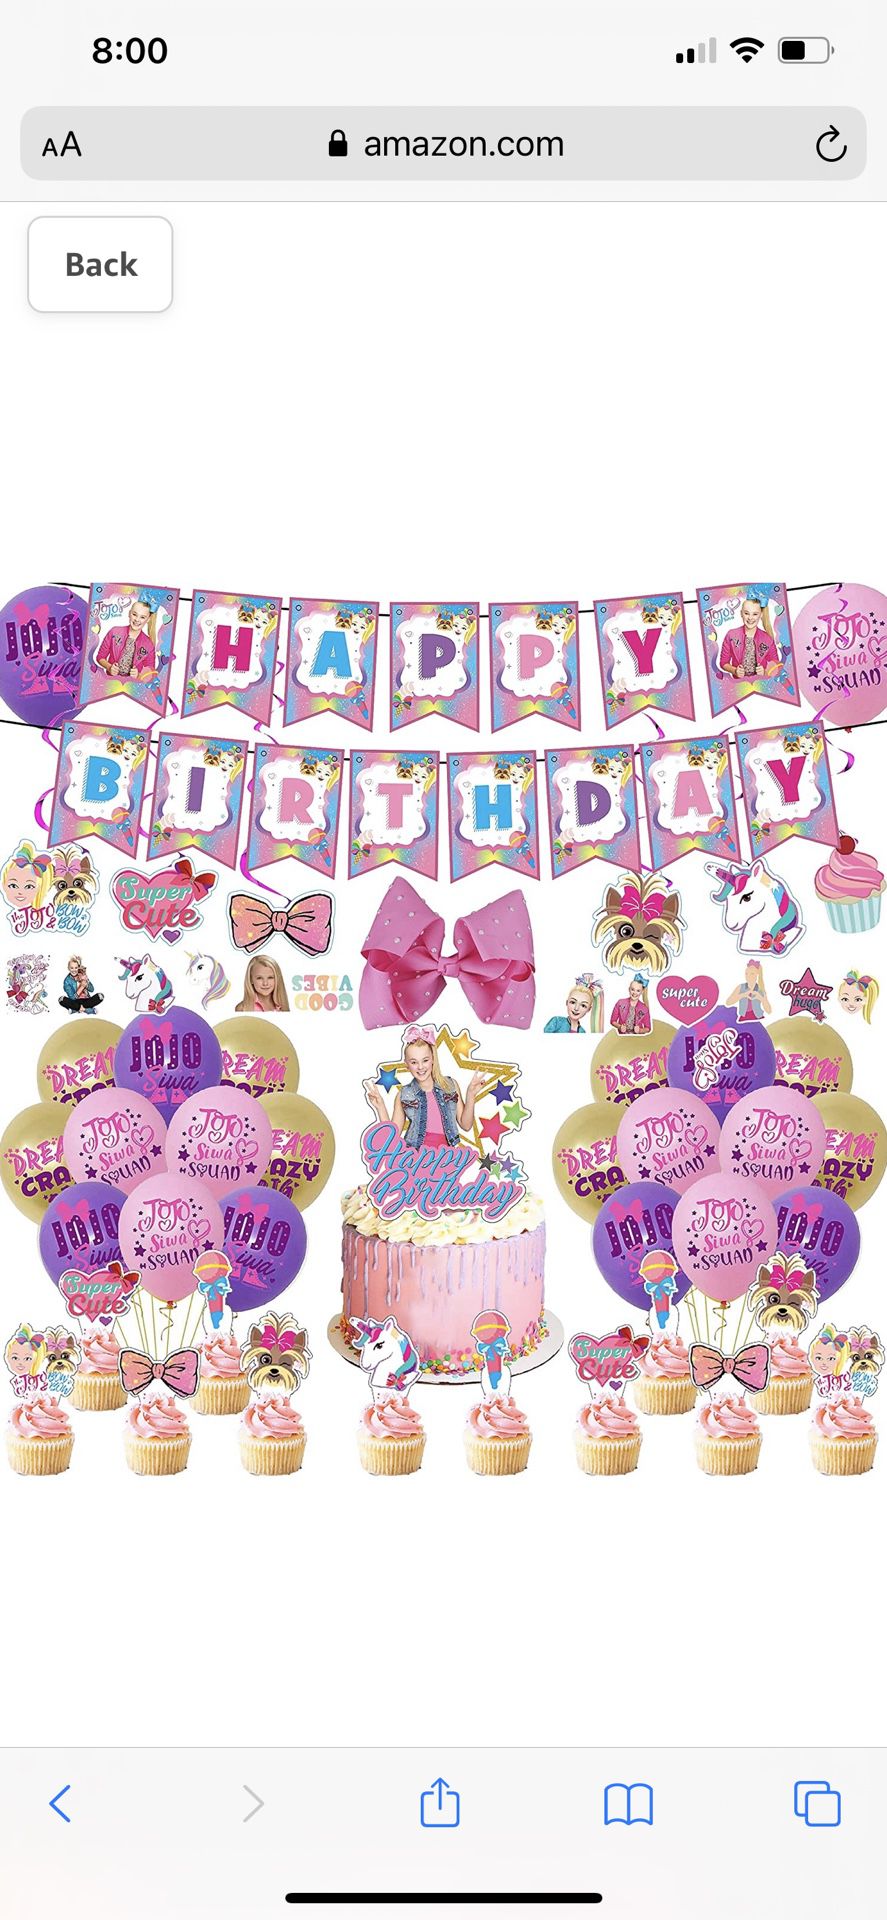 JoJo Birthday Party Supplies Party Decoration Include Hair Bow, Birthday Banner, Hanging Swirls,Cupcake Topper,napkins, Plate ,Cake Decorating car Joj